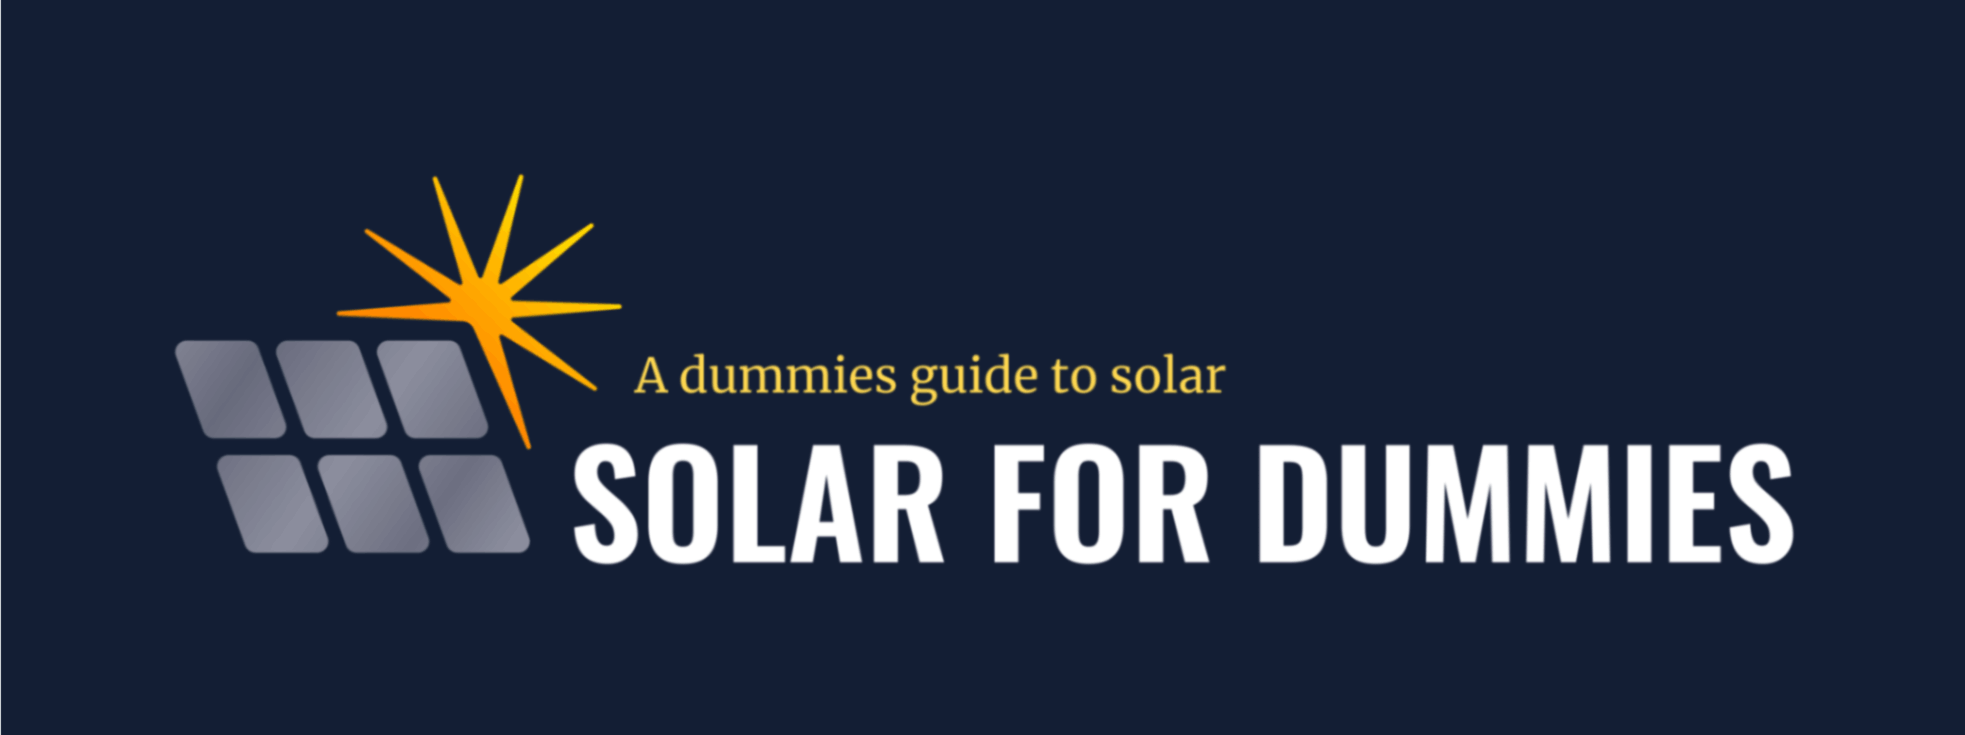 Dummies Guide to Solar, Online Event